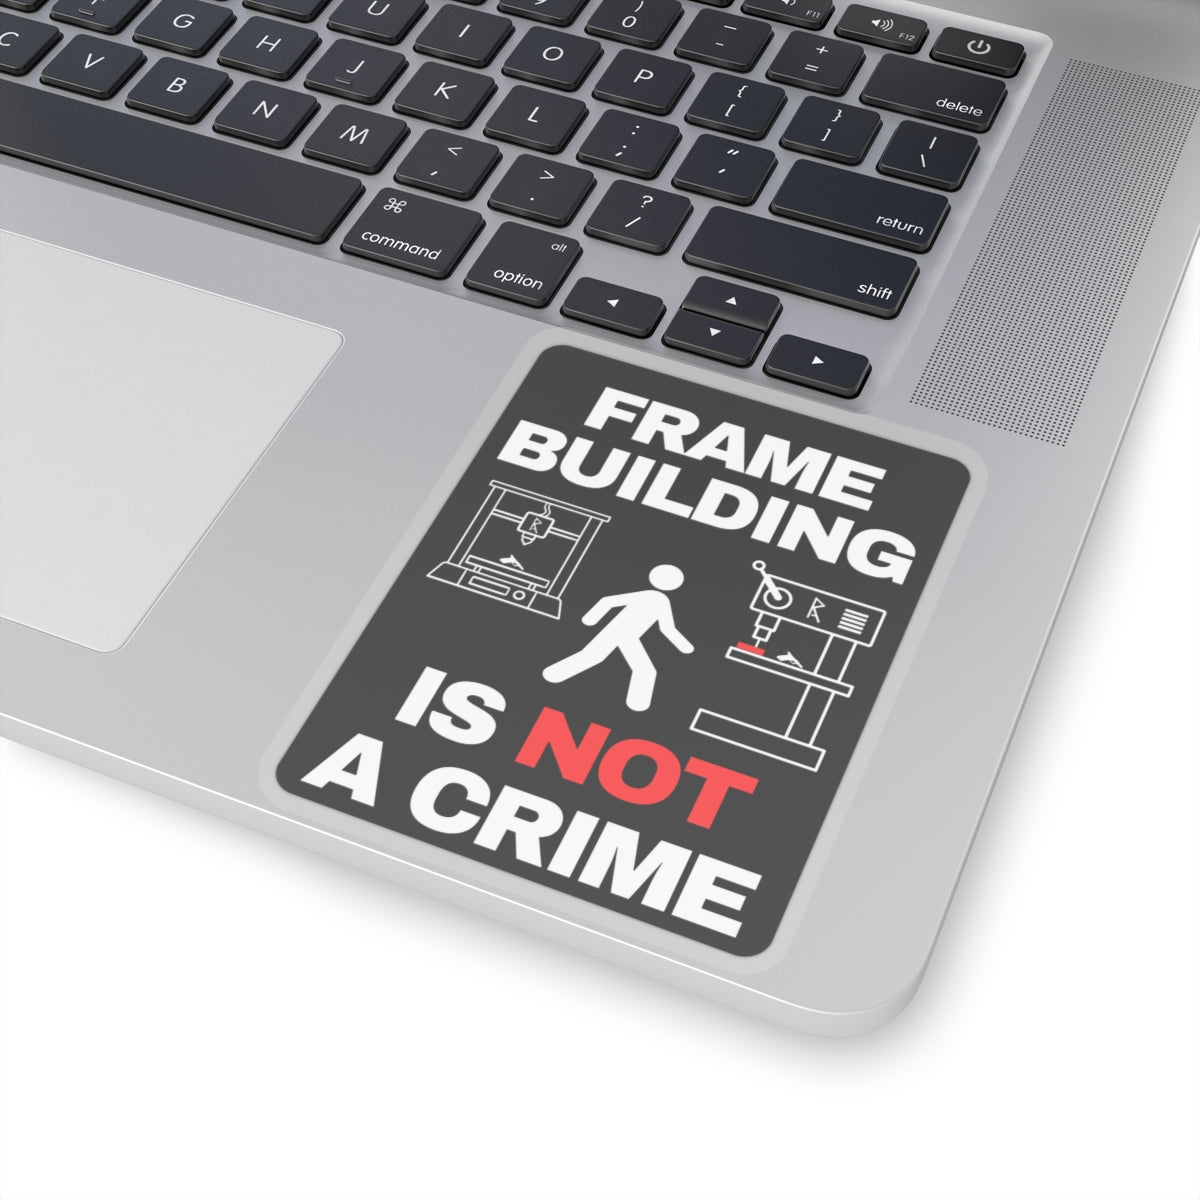 Frame Building is not a crime - sticker